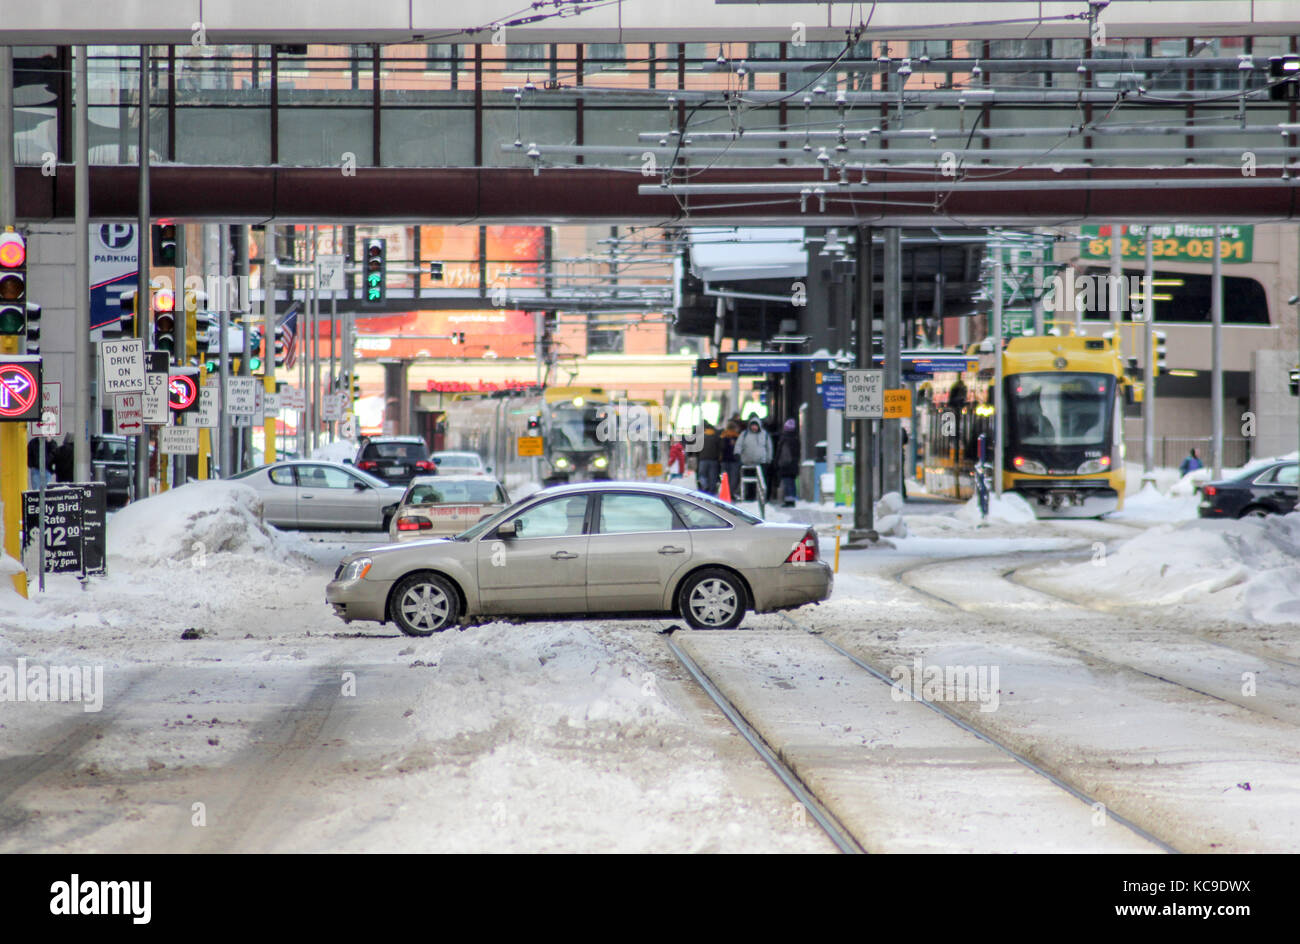 MINNEAPOLIS, MINNESOTA/USA – JANUARY 15, 2011: A downtown Minneapolis intersection in the middle of Winter. Stock Photo